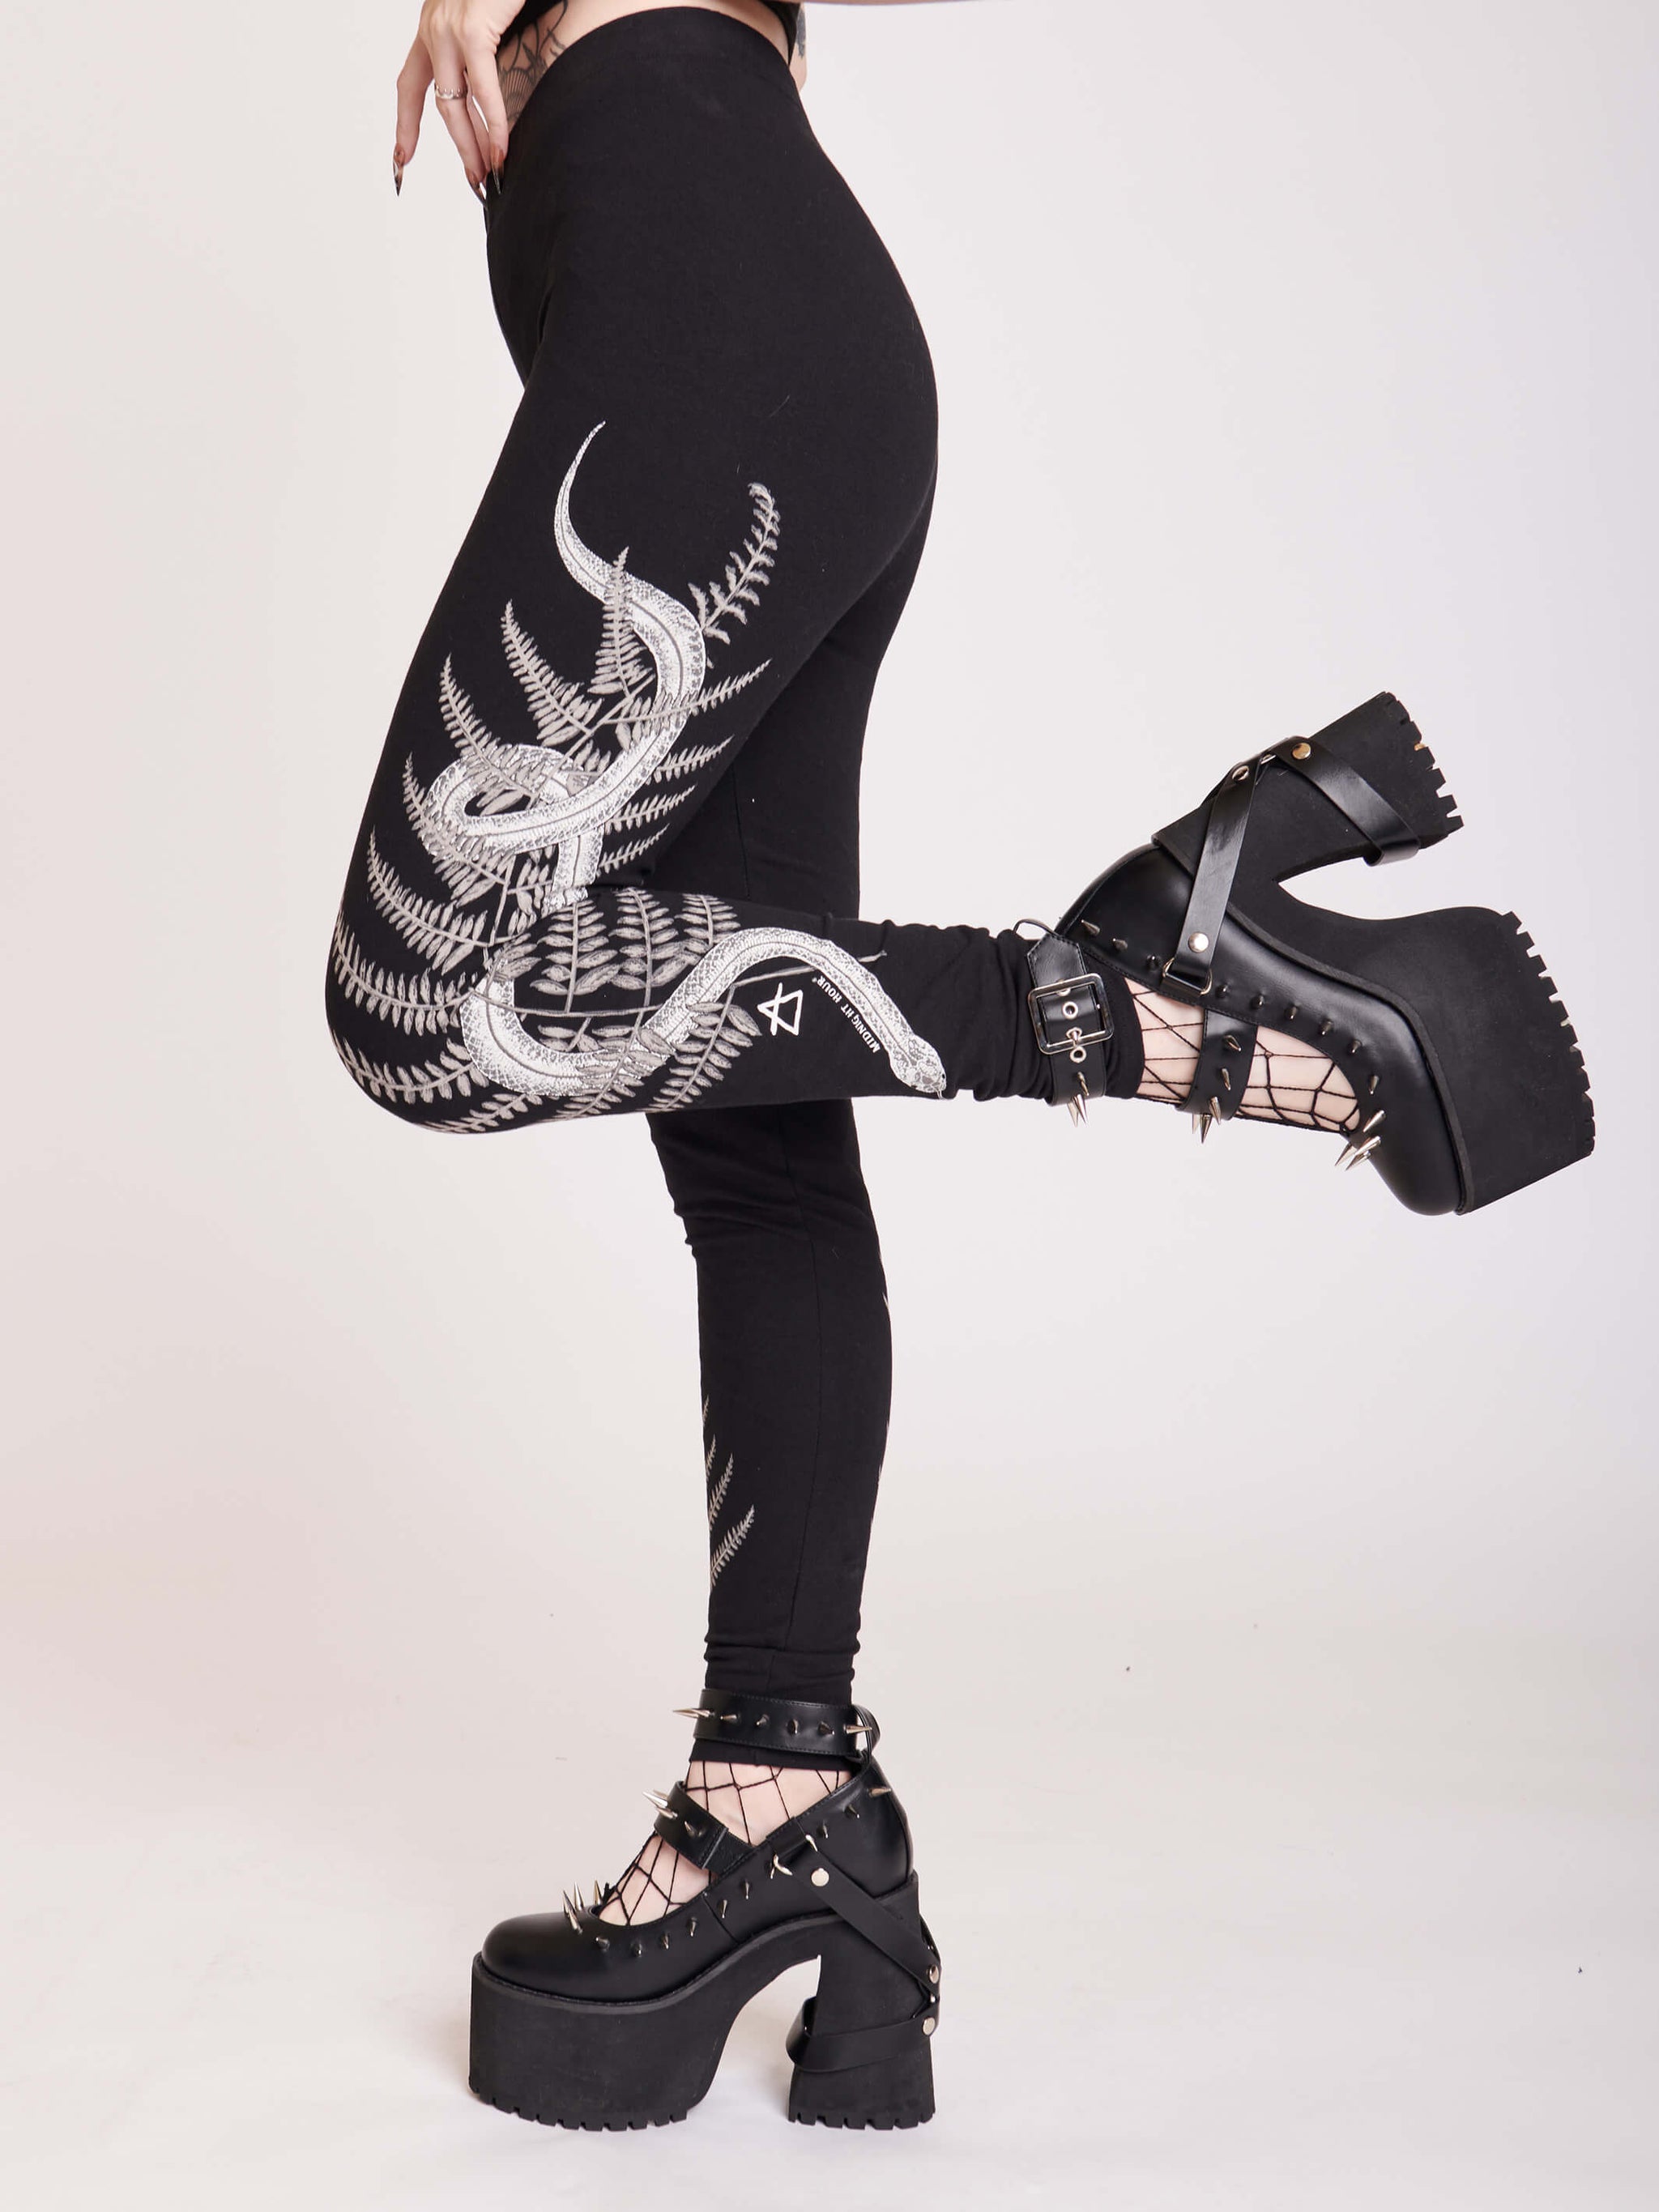 Is That The New Goth Snake Print Leggings ??